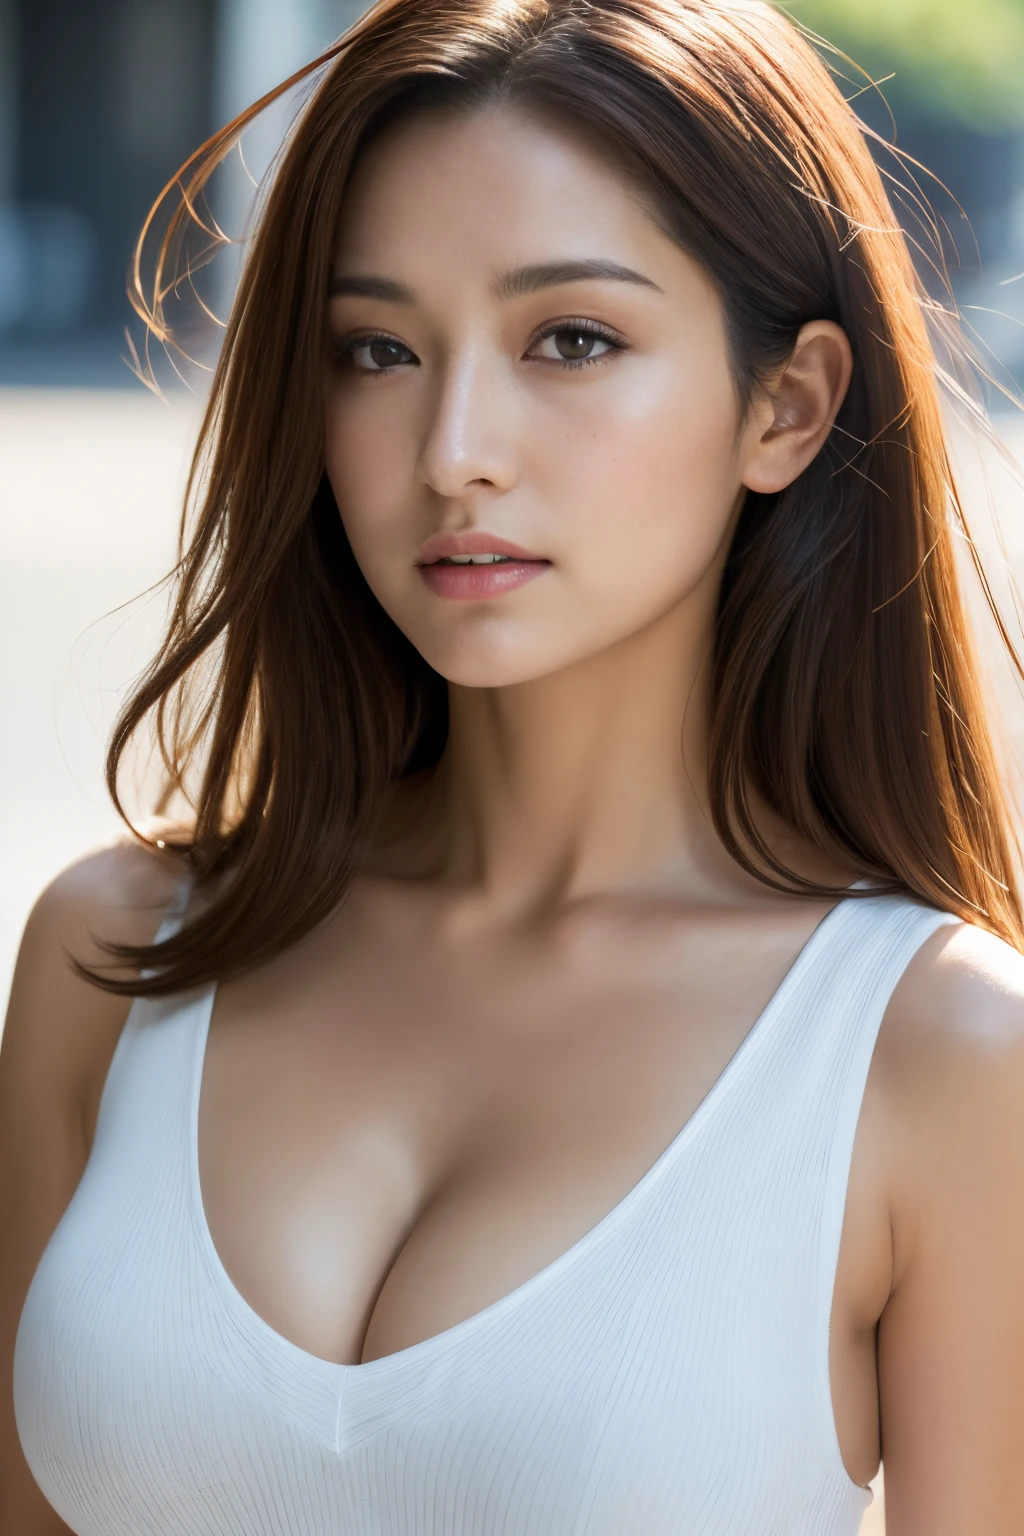 Best Quality, 8k wallpaper, masutepiece, Perfect figure, Beautuful Women, Photo from the front, Look at viewers, Slim abs, dark brown  hair, Colossal , V-neck shirt, cleavage of the breast, Not exposed, Natural light, the city street, Highly detailed facial and skin texture, A detailed eye